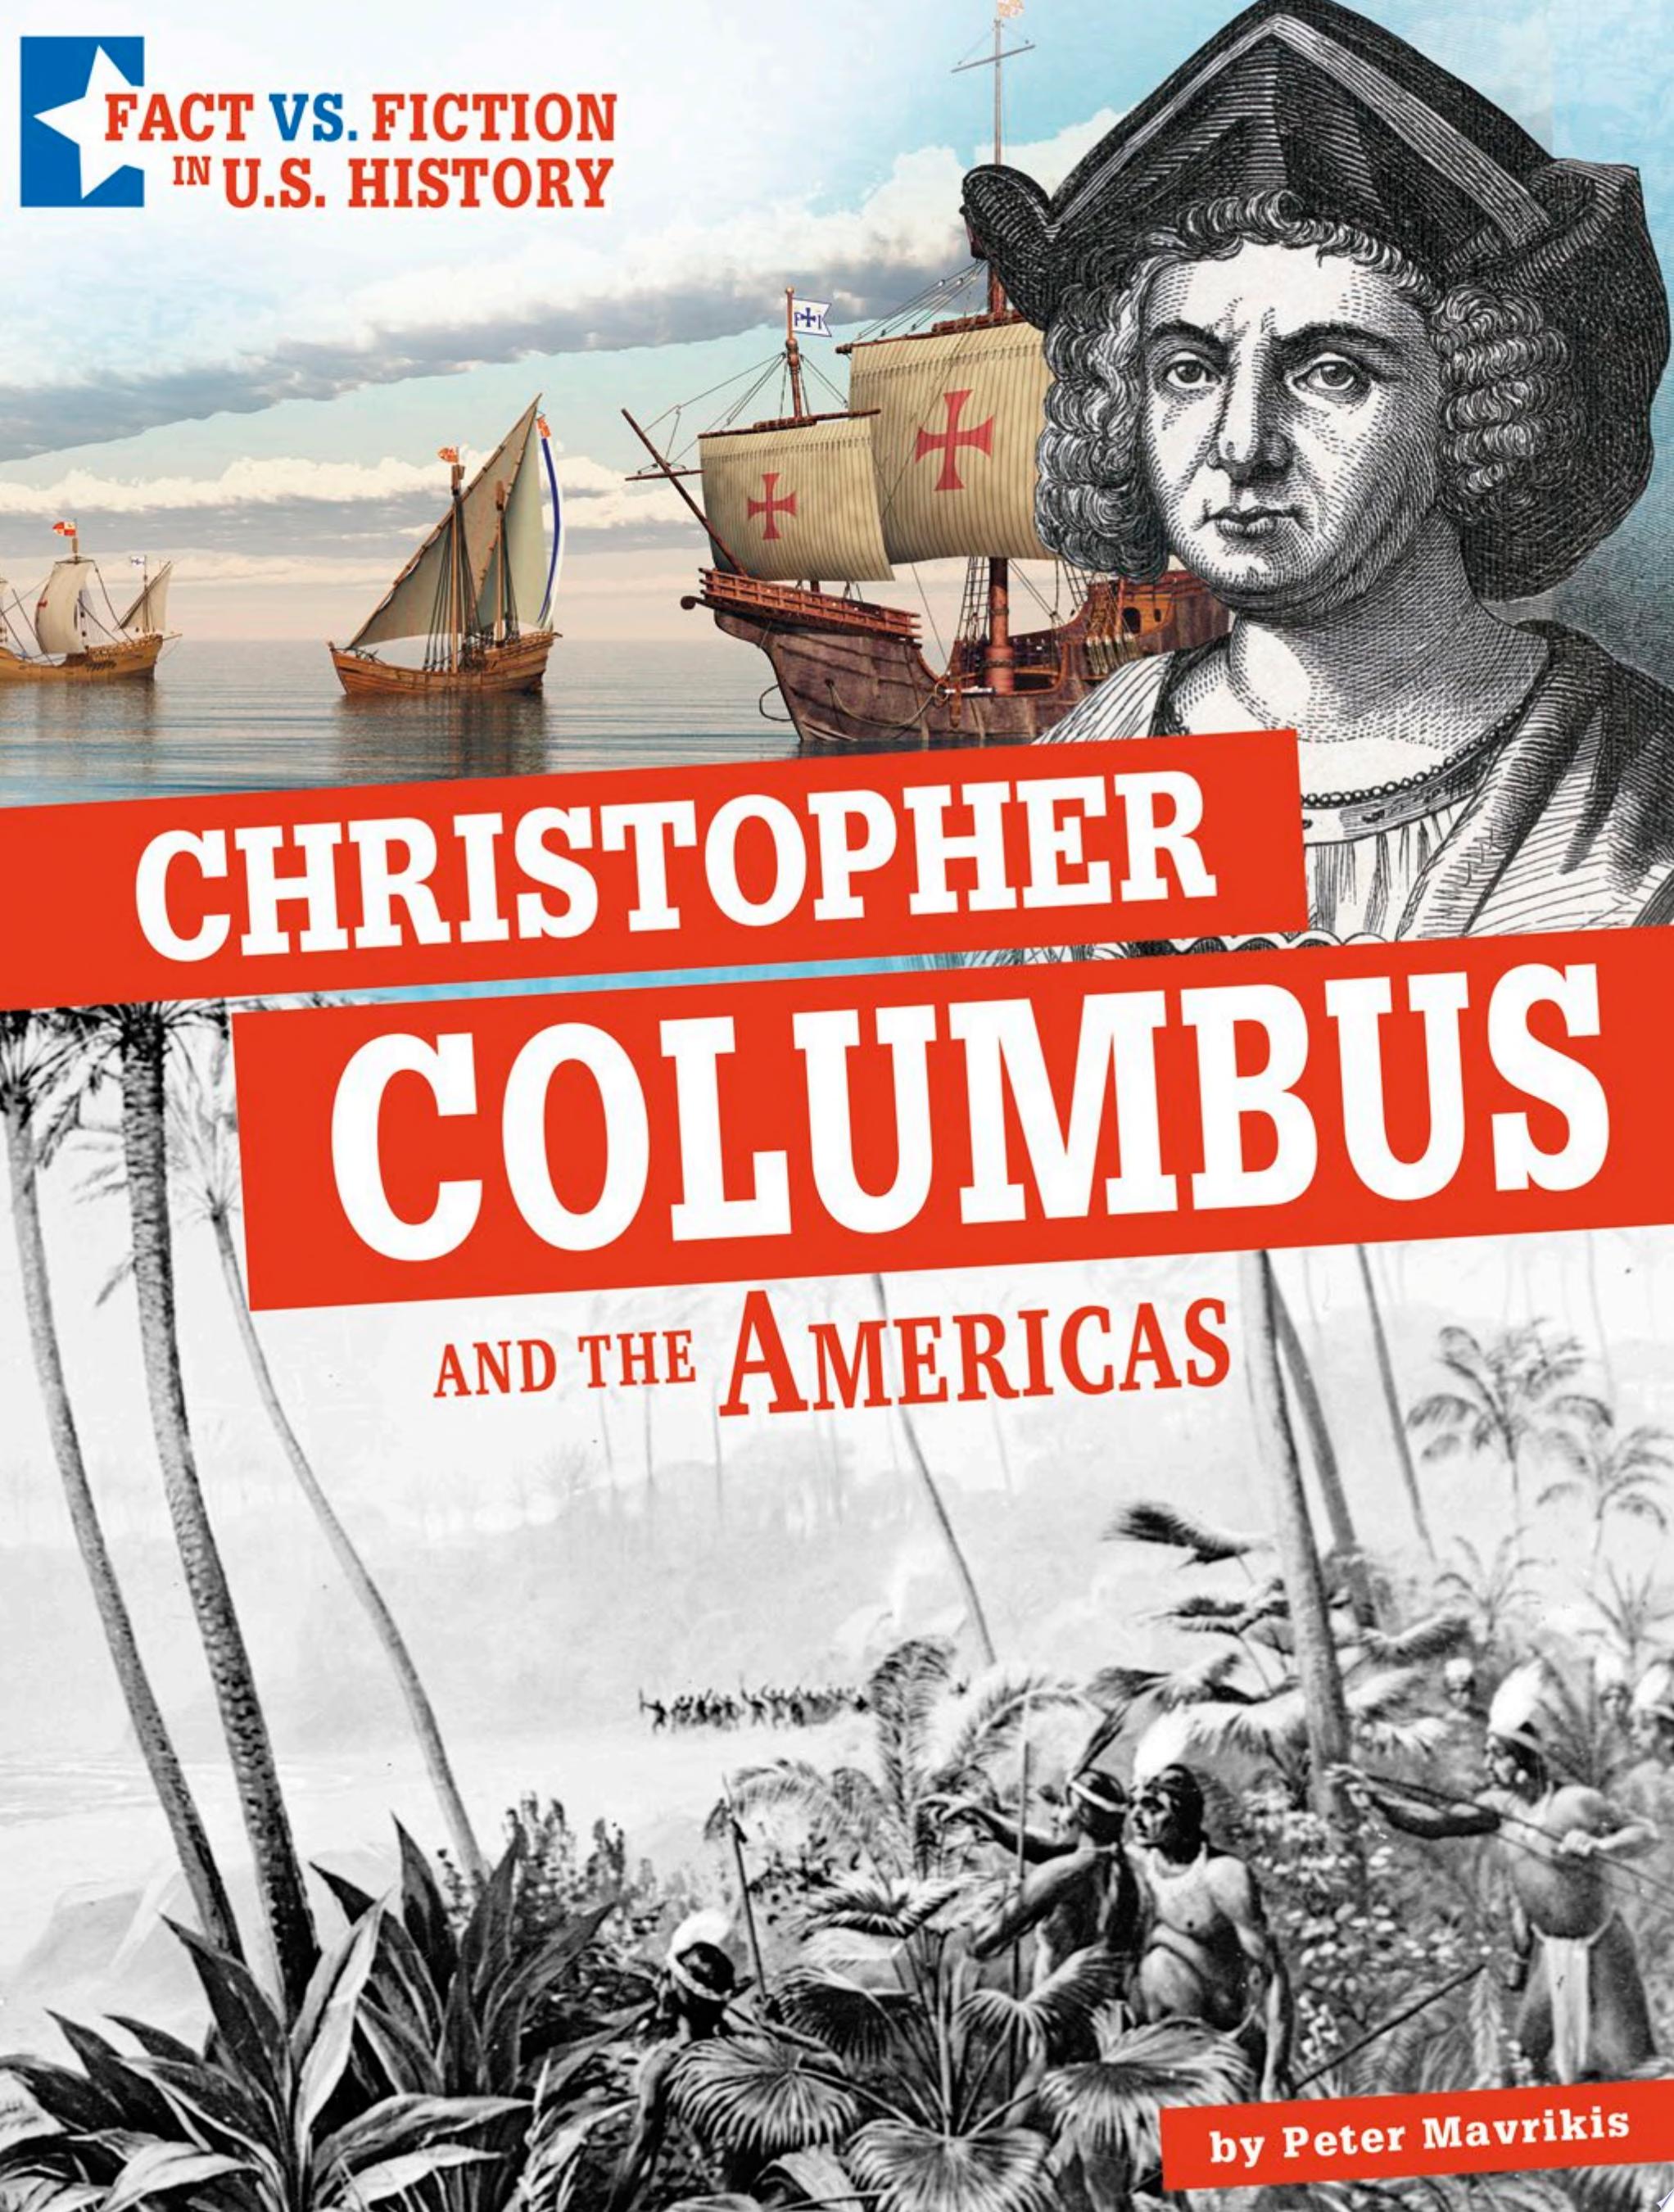 Image for "Christopher Columbus and the Americas"